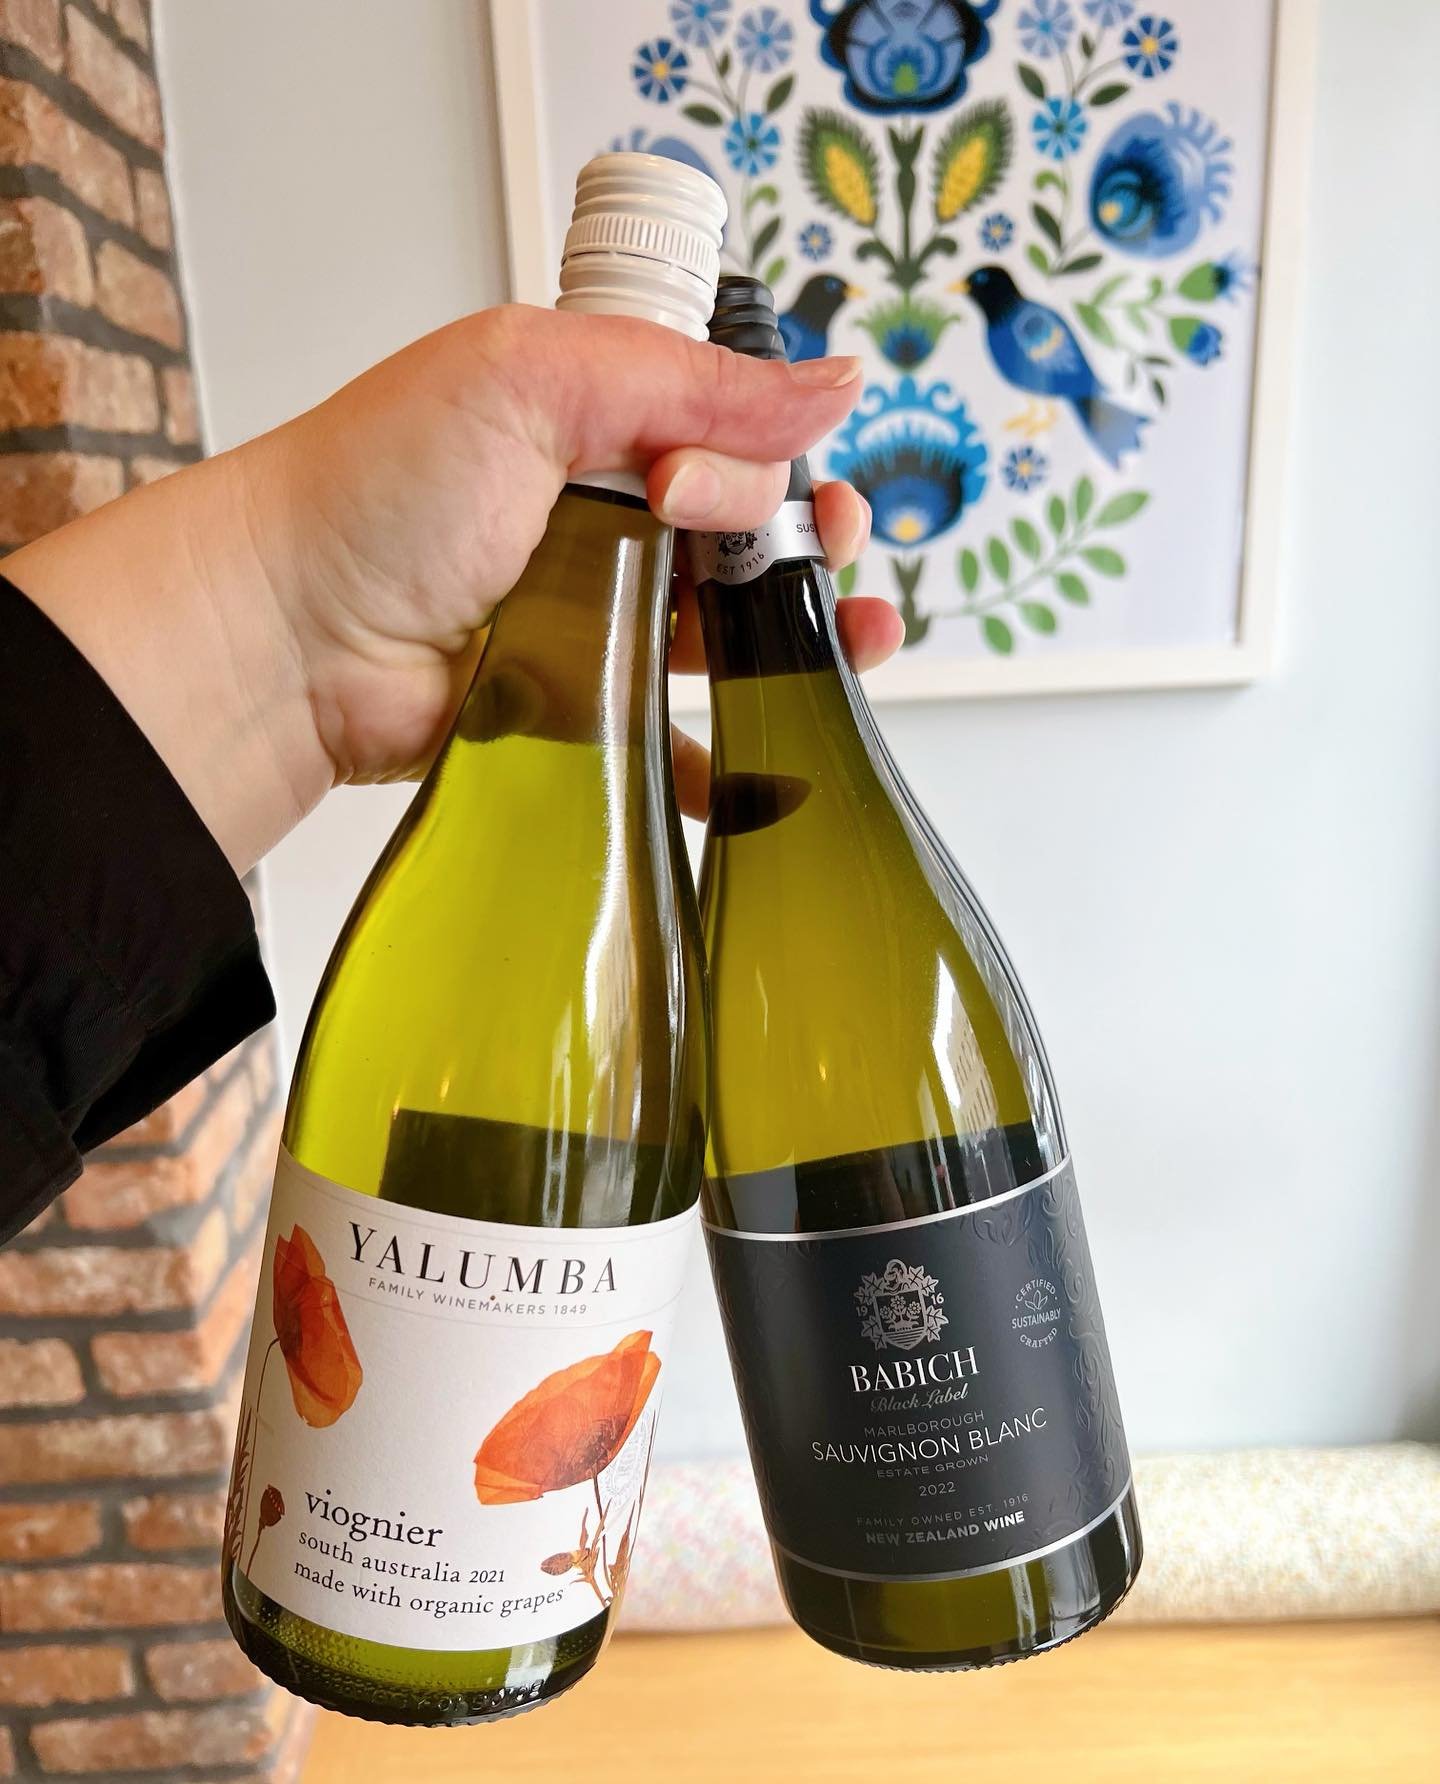 When it feels like summer you know it&rsquo;s time for summer wines! These delightful white wines pair exceptionally well with our deliciously fluffy handmade pierogi. ☀️🥟 #summerwine